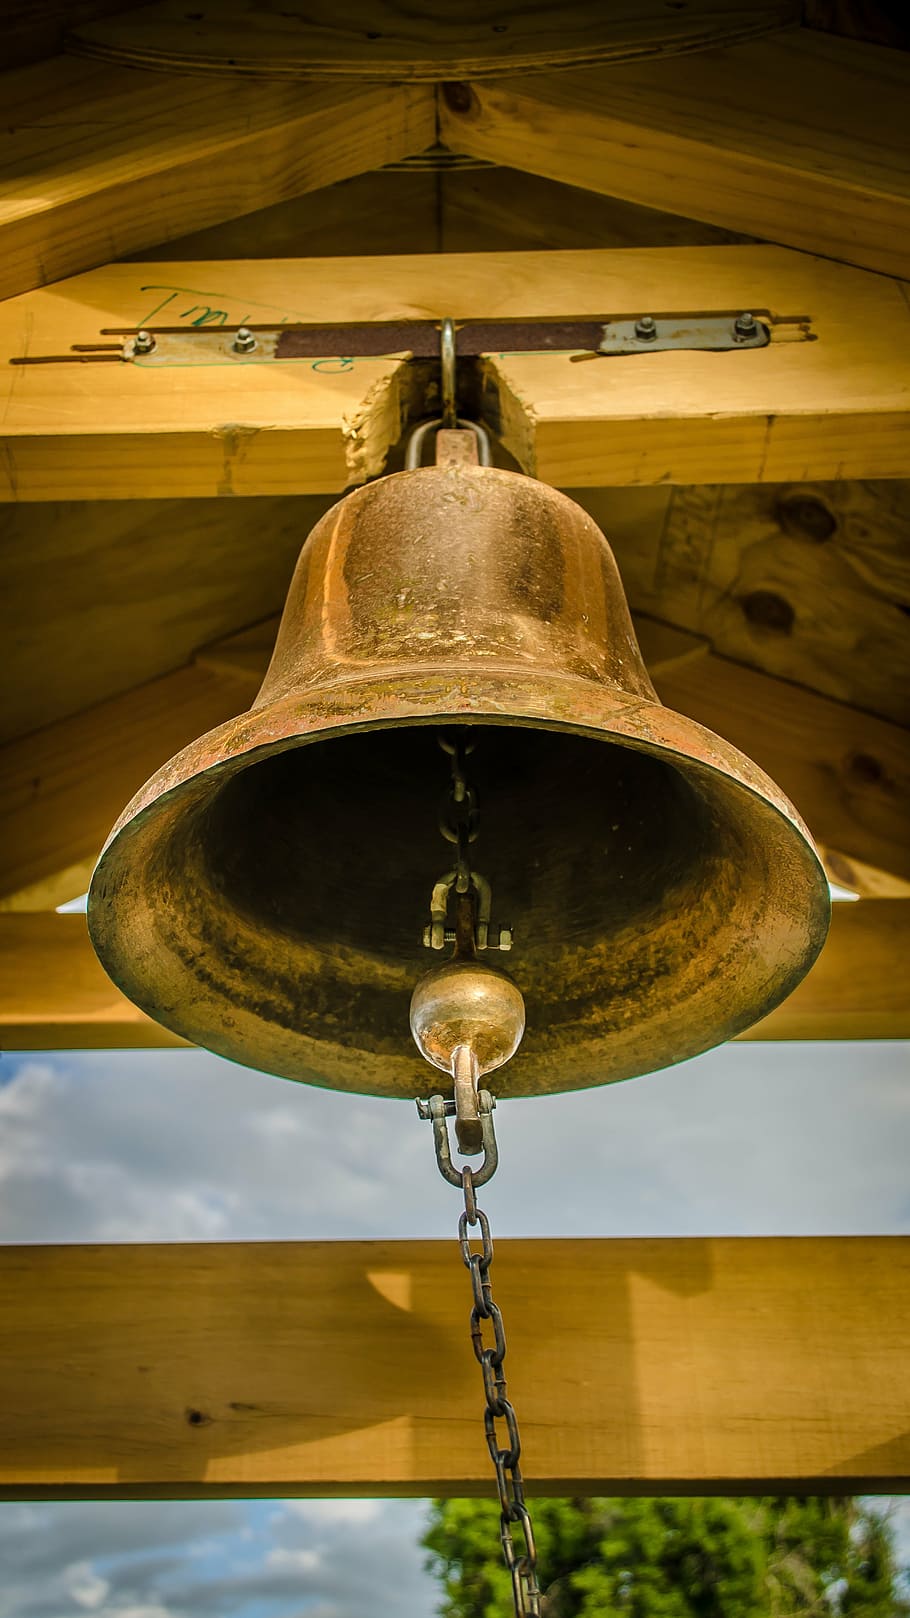 low-angle photography, gold-colored bell, campaign, bell tower, bronze, school, church, metal, hanging, close-up